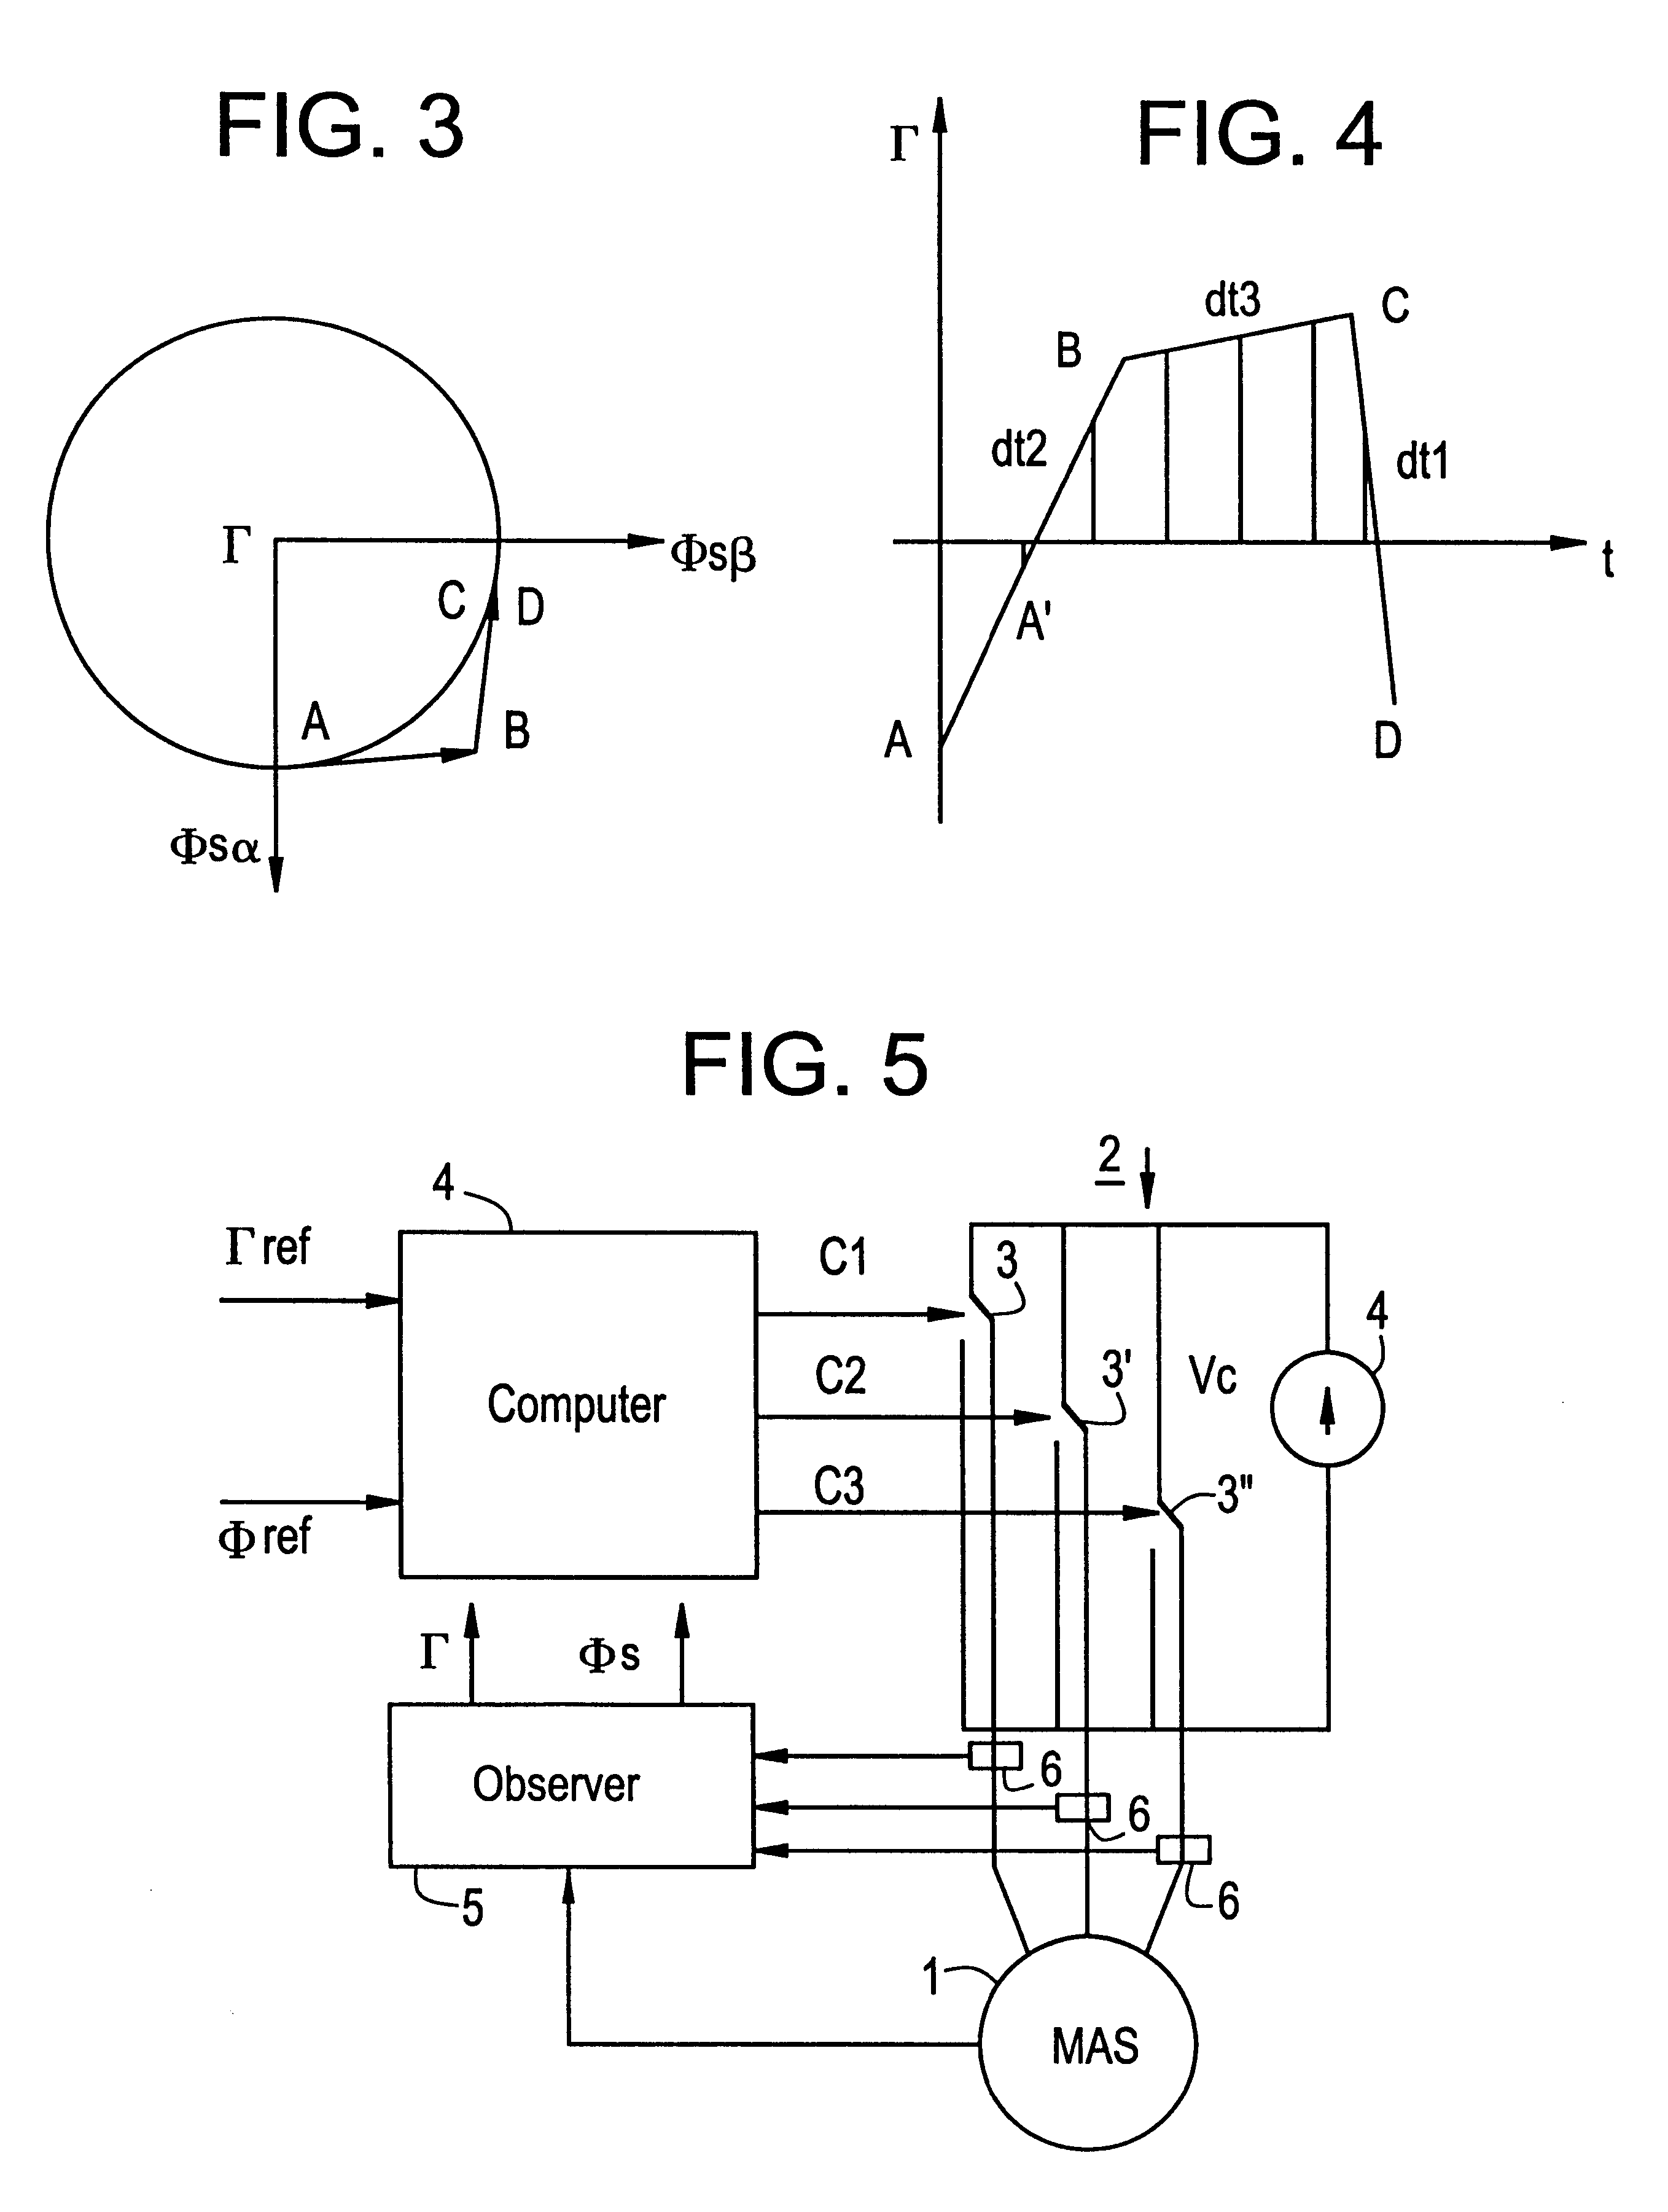 Method of controlling a rotary electrical machine, a servo-control system for implementing the method, and a rotary machine fitted with such a system